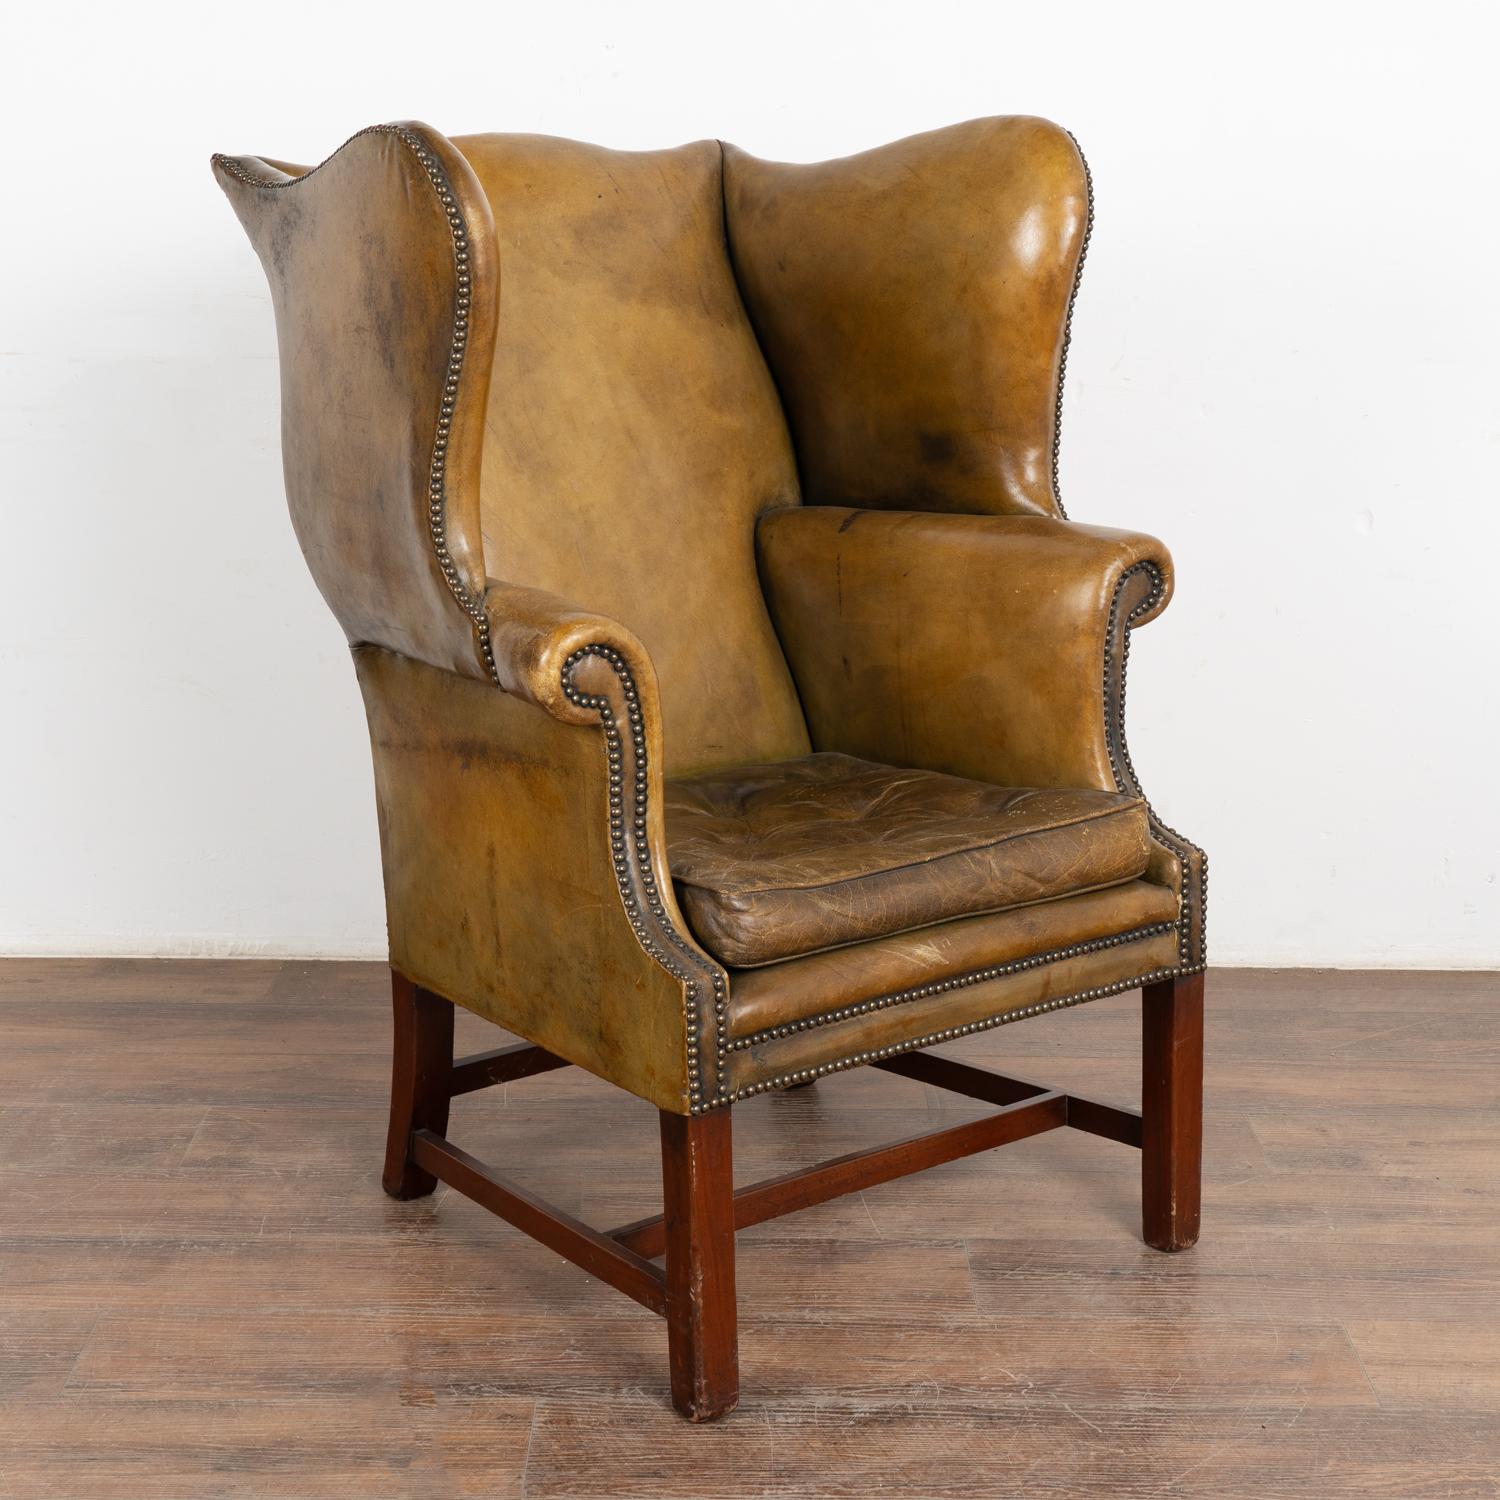 Vintage olive green leather George III style wingback arm chair with classic nail head trim, rolled arms and dramatic high back.
Sold in vintage used condition. Frame is solid/stable and sits comfortably; mahogany legs. Seat shows definite